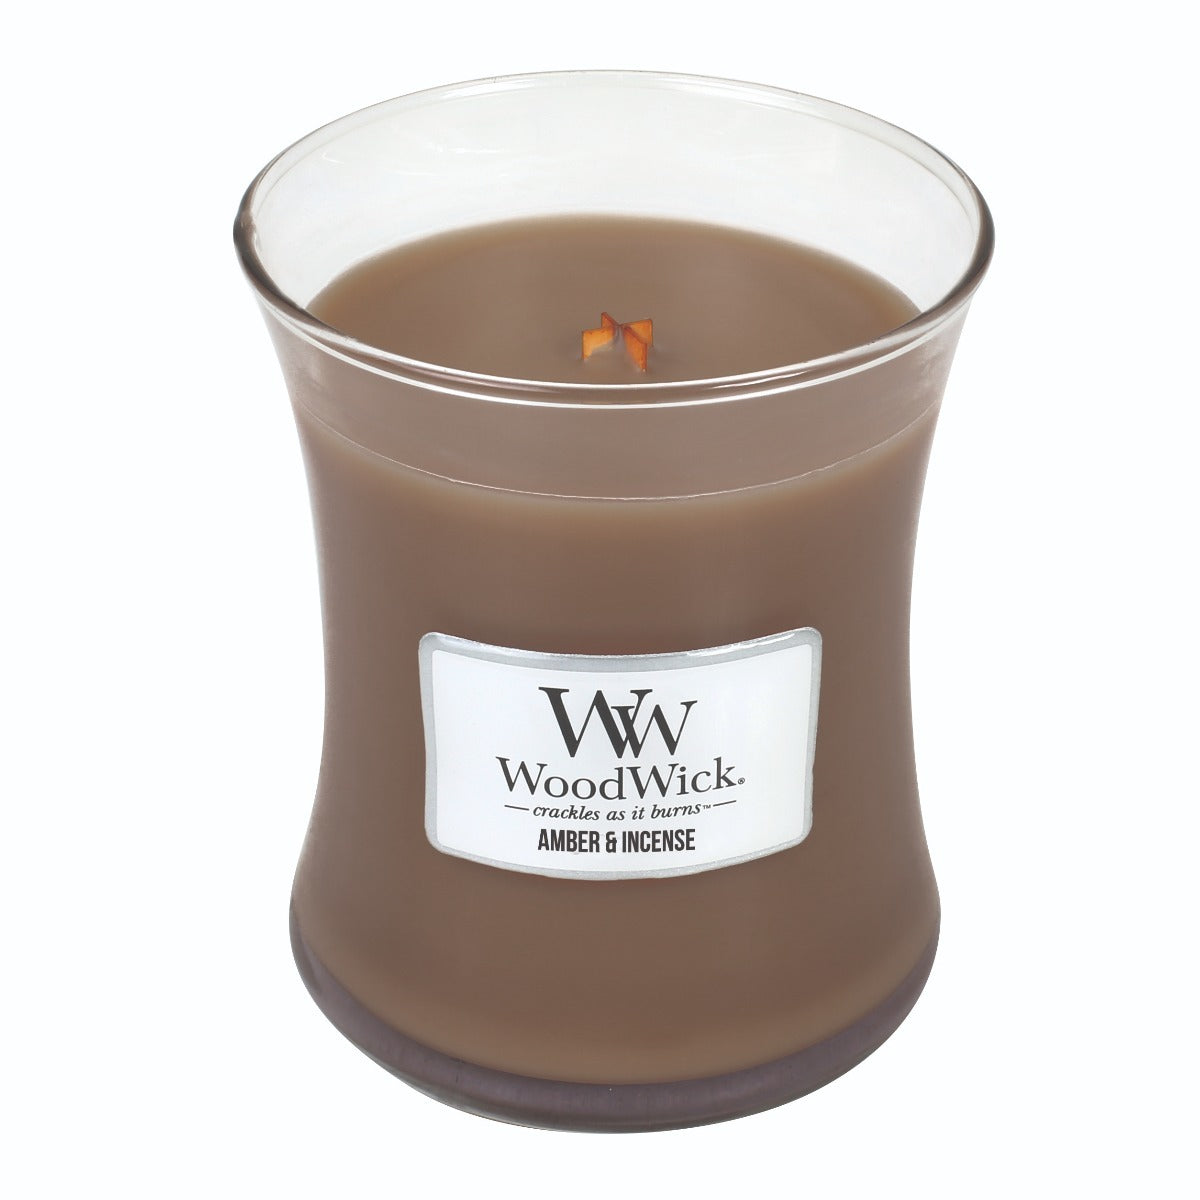 WOODWICK AMBER AND INCENSE MEDIUM - Gifts R Us